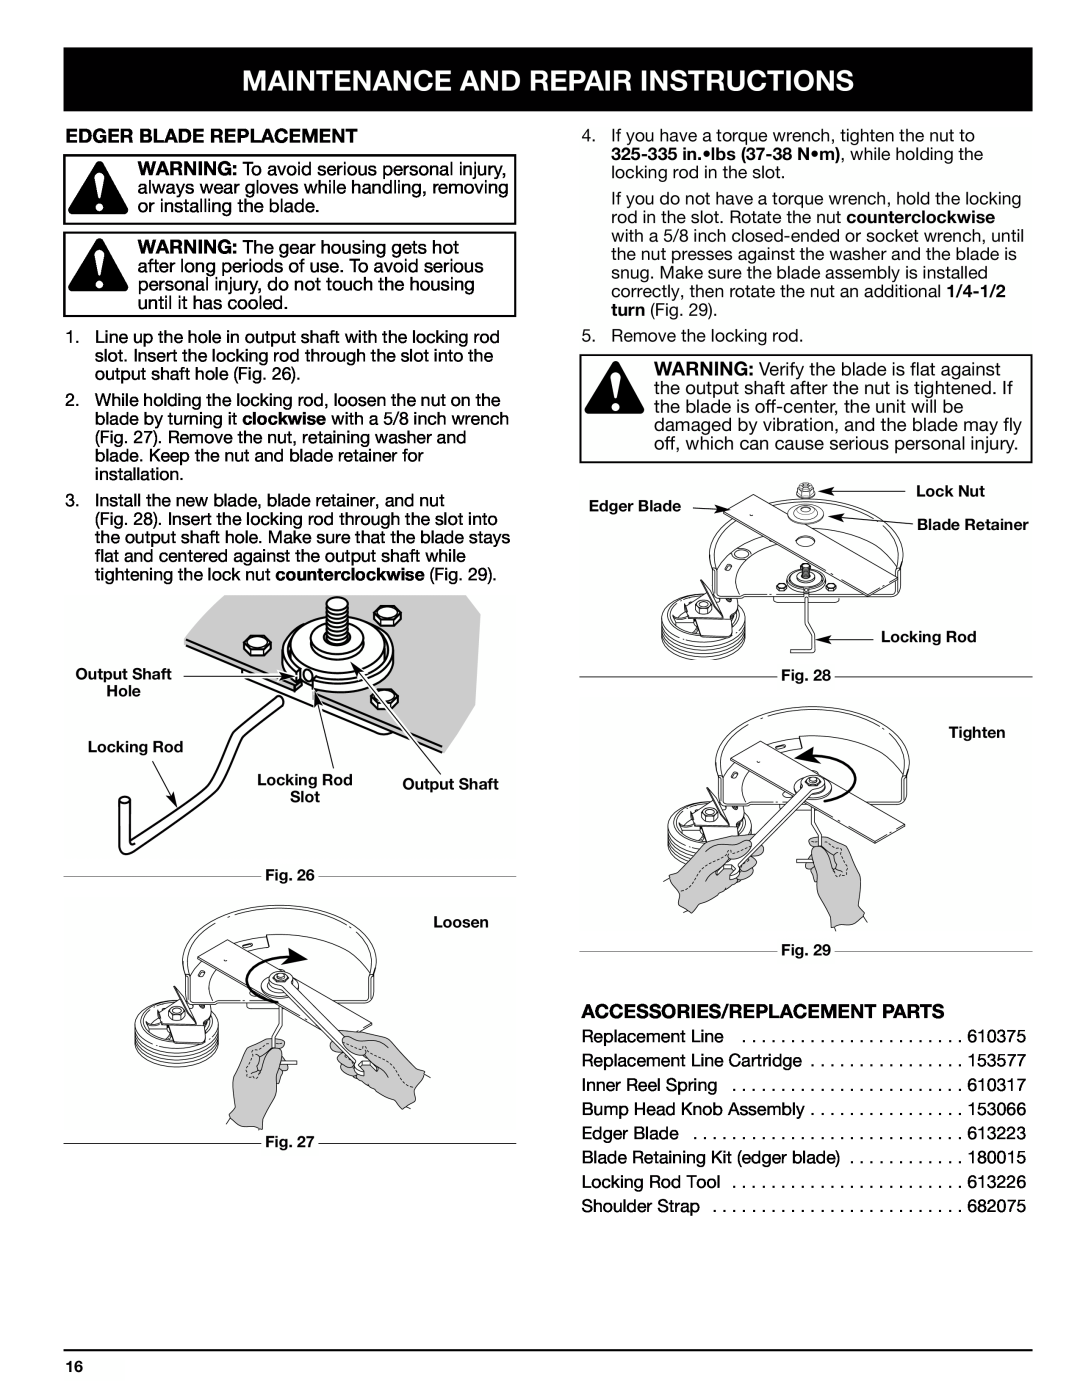 Ryobi 130rEB manual Maintenance And Repair Instructions, Edger Blade Replacement, Accessories/Replacement Parts 